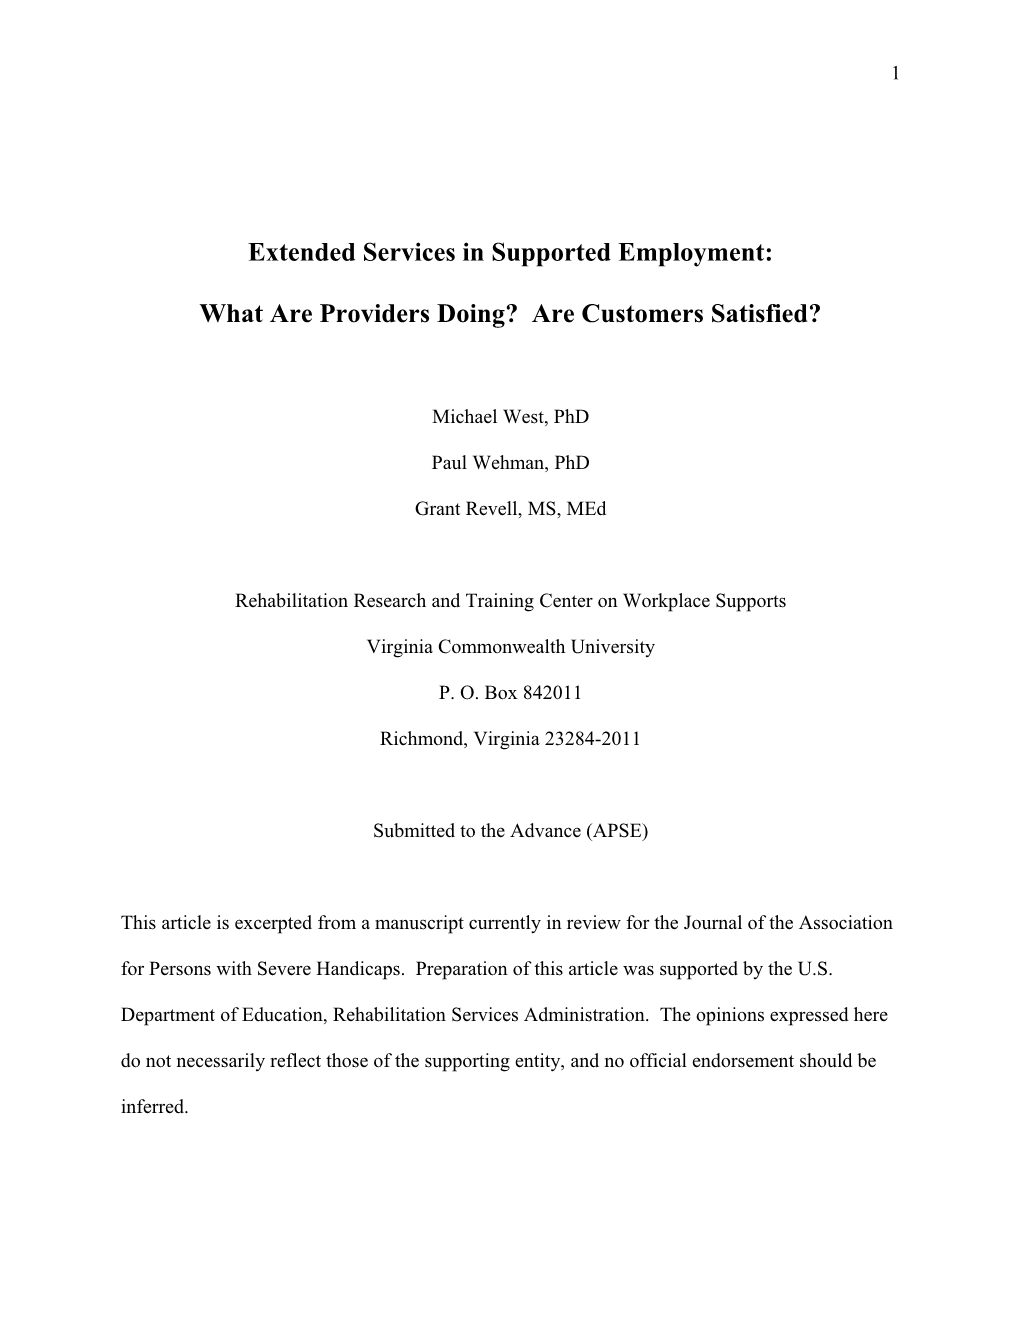 Extended Services in Supported Employment